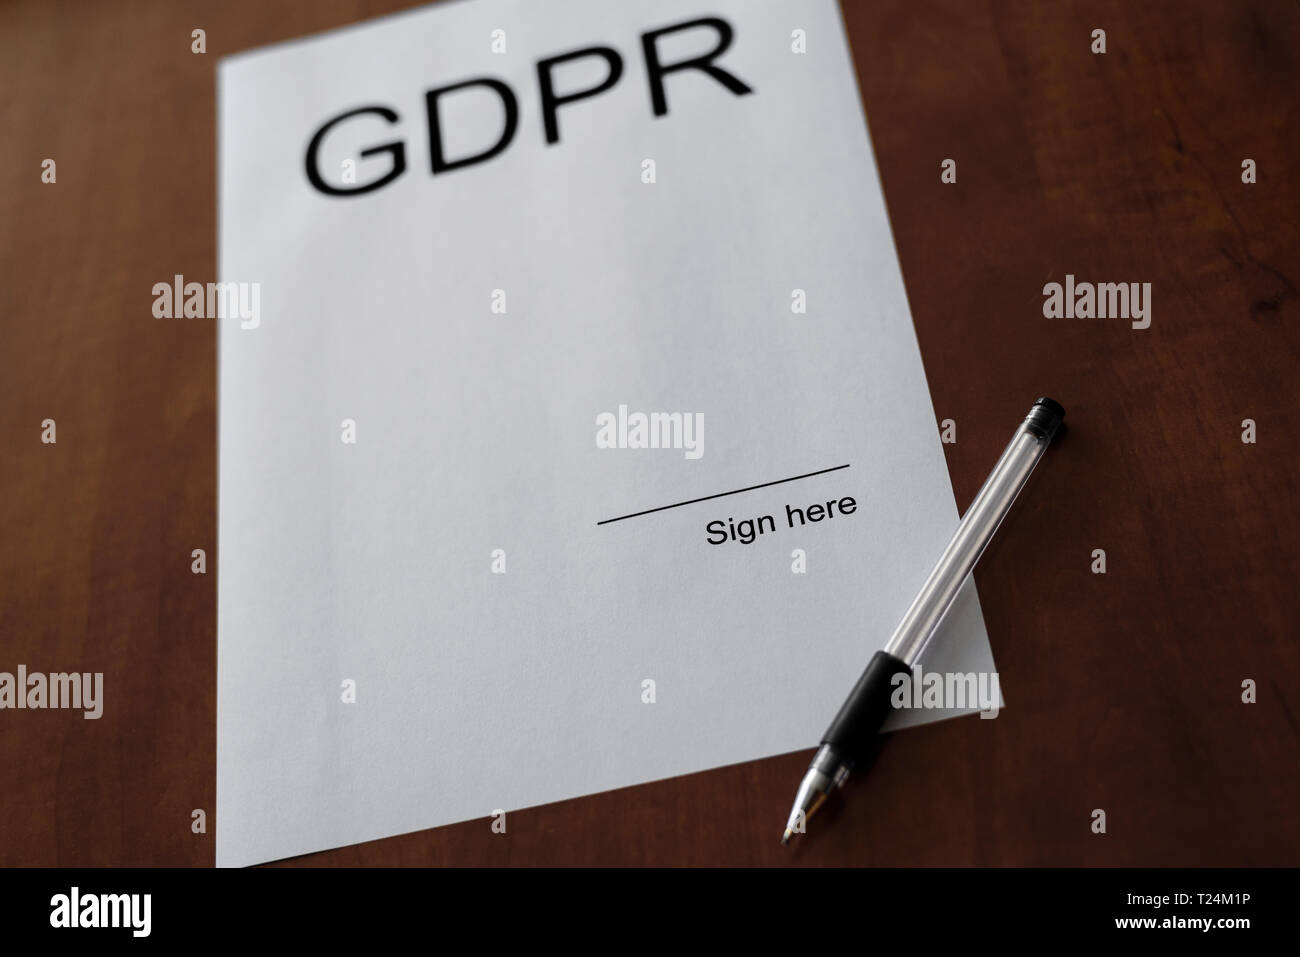 GDPR - General Data Protection Regulation - new legislation law in European Union about personal data safety. White sheet of paper with pen. Blank spa Stock Photo